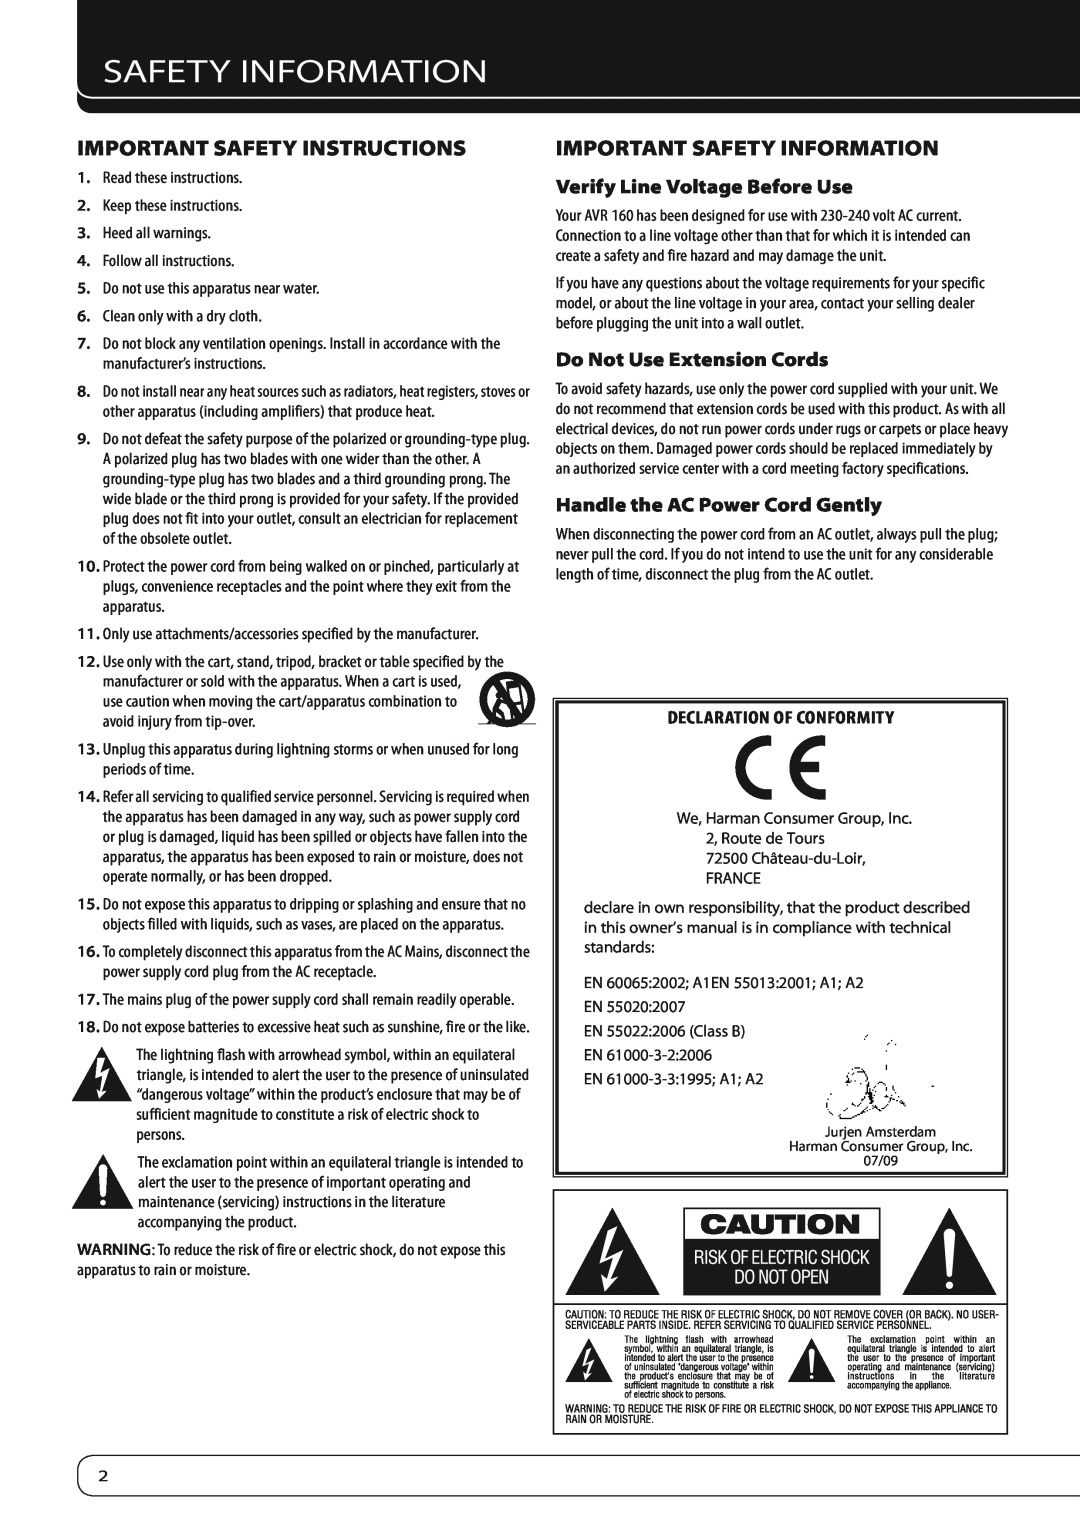 Harman-Kardon AVR 160 owner manual Safety Information, Verify Line Voltage Before Use, Do Not Use Extension Cords 